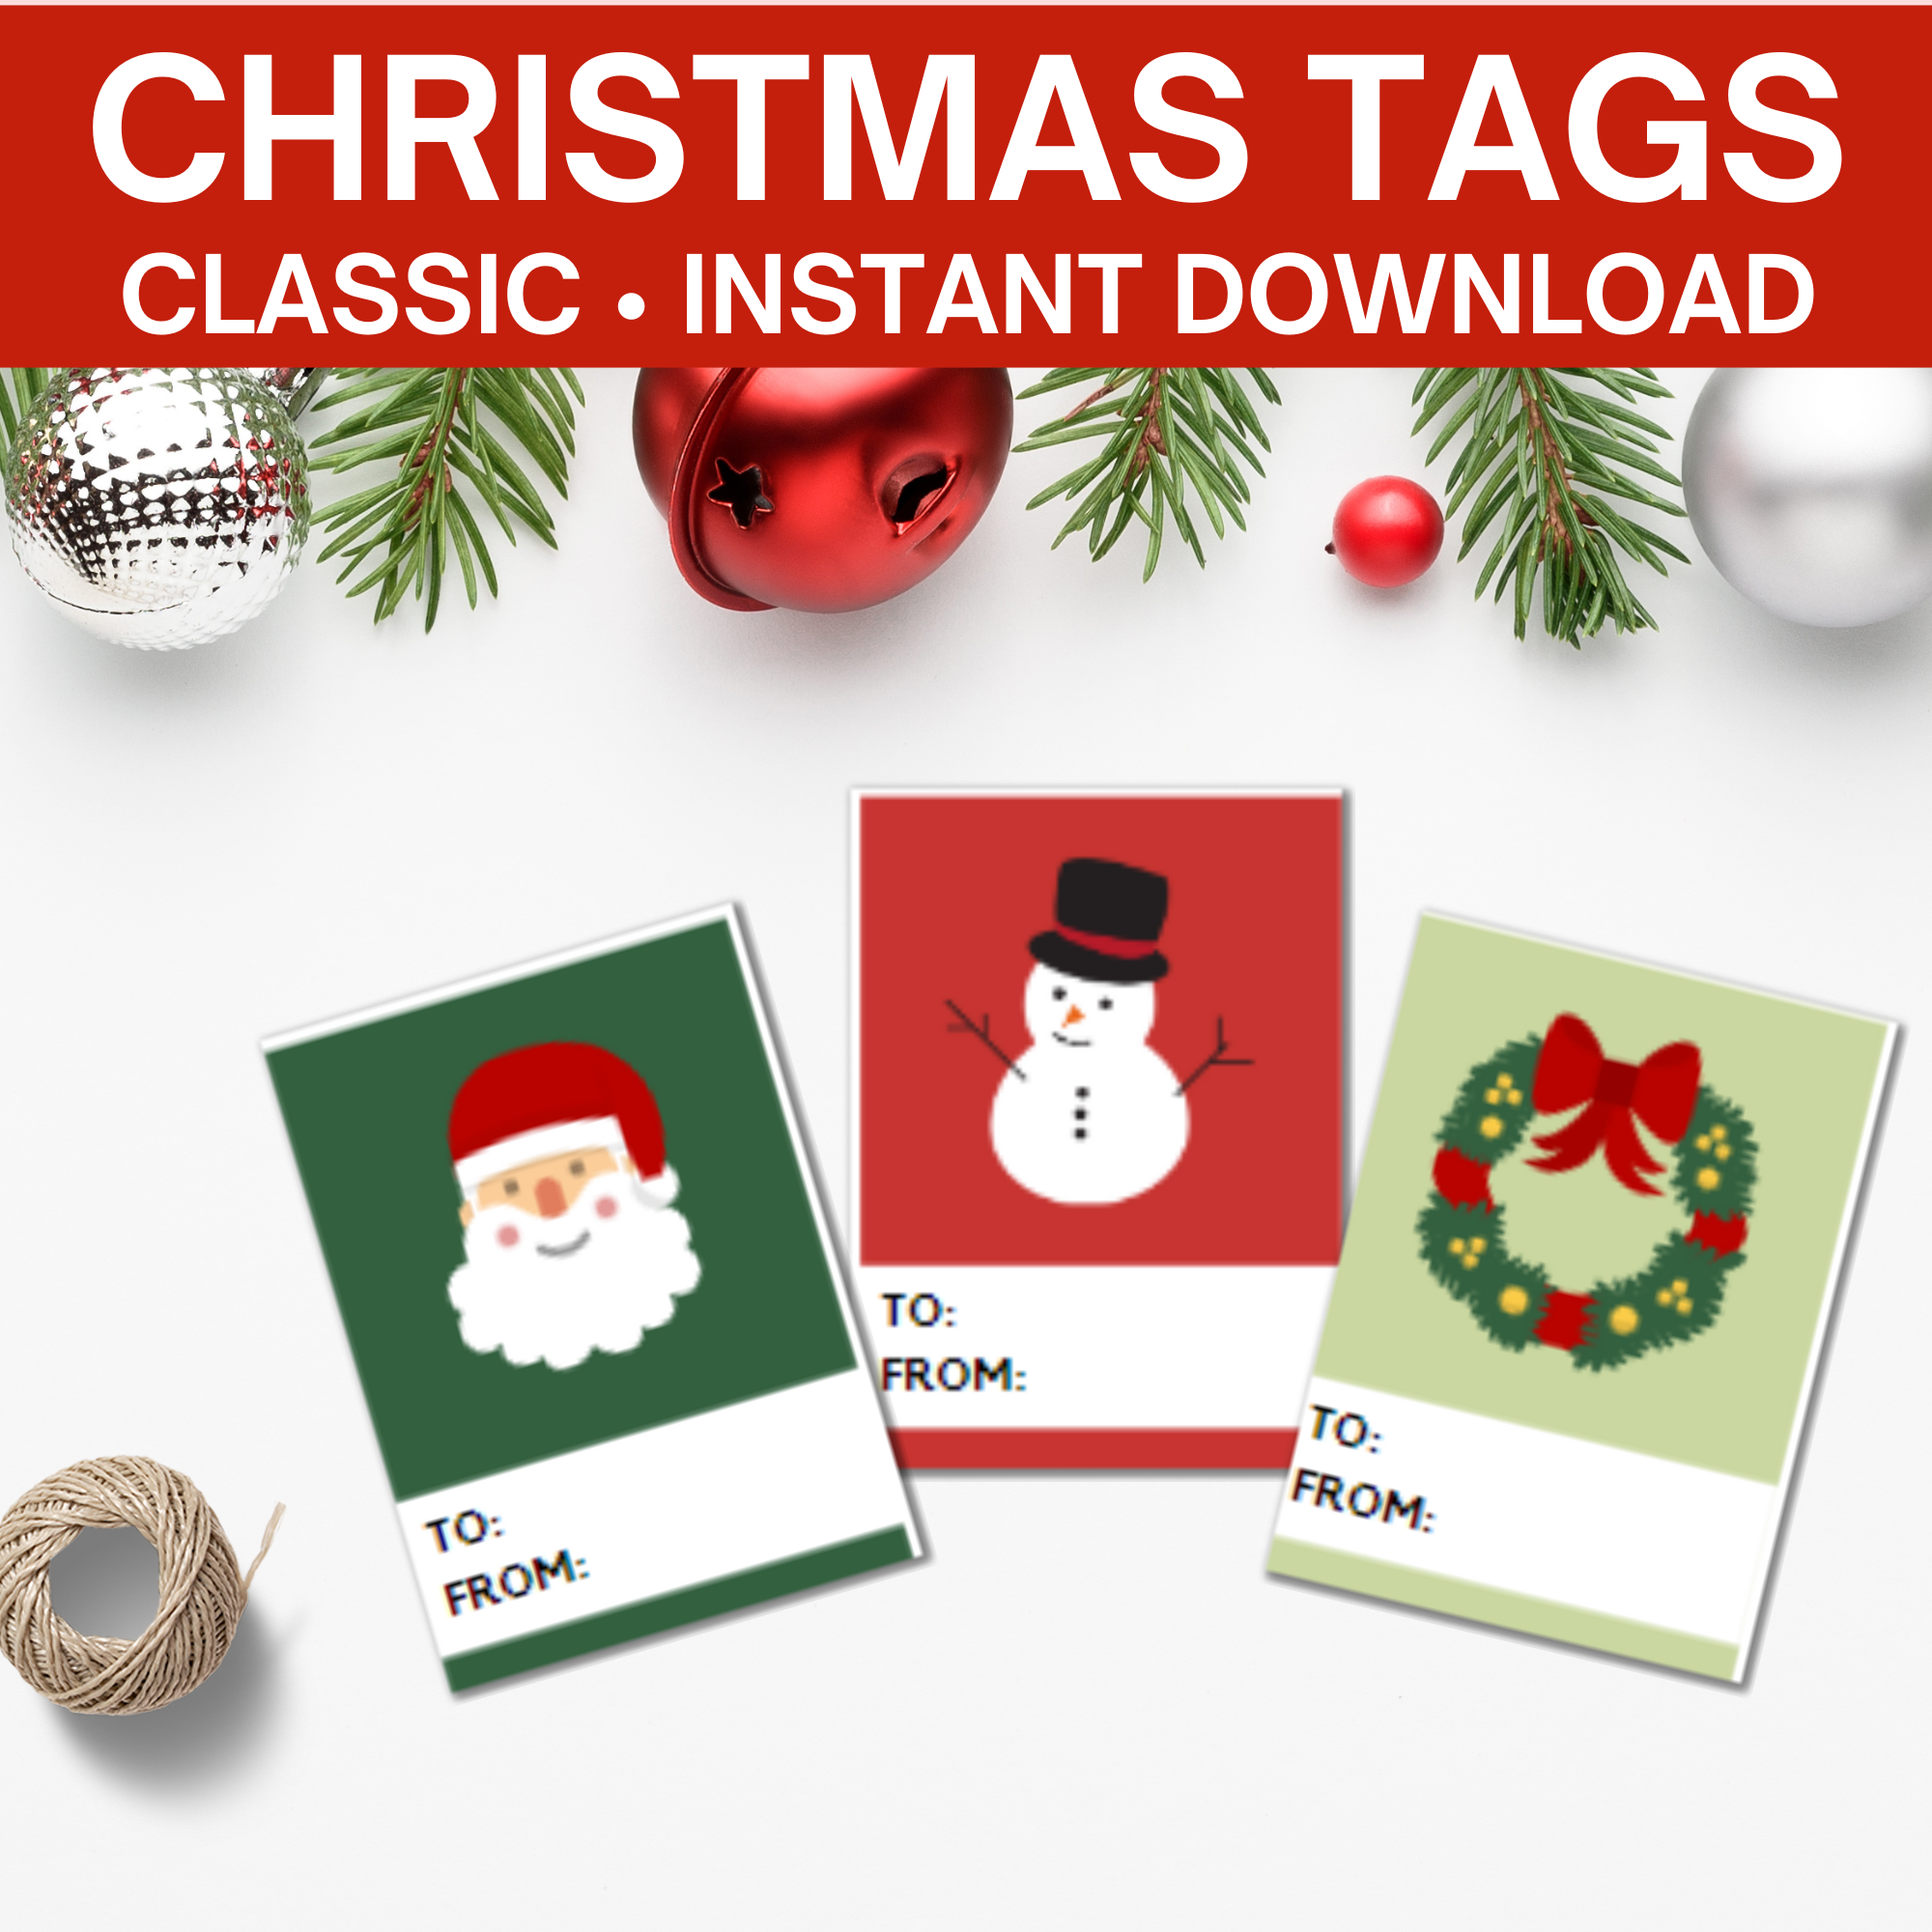 To And From Christmas Gift Tags – So Festive!